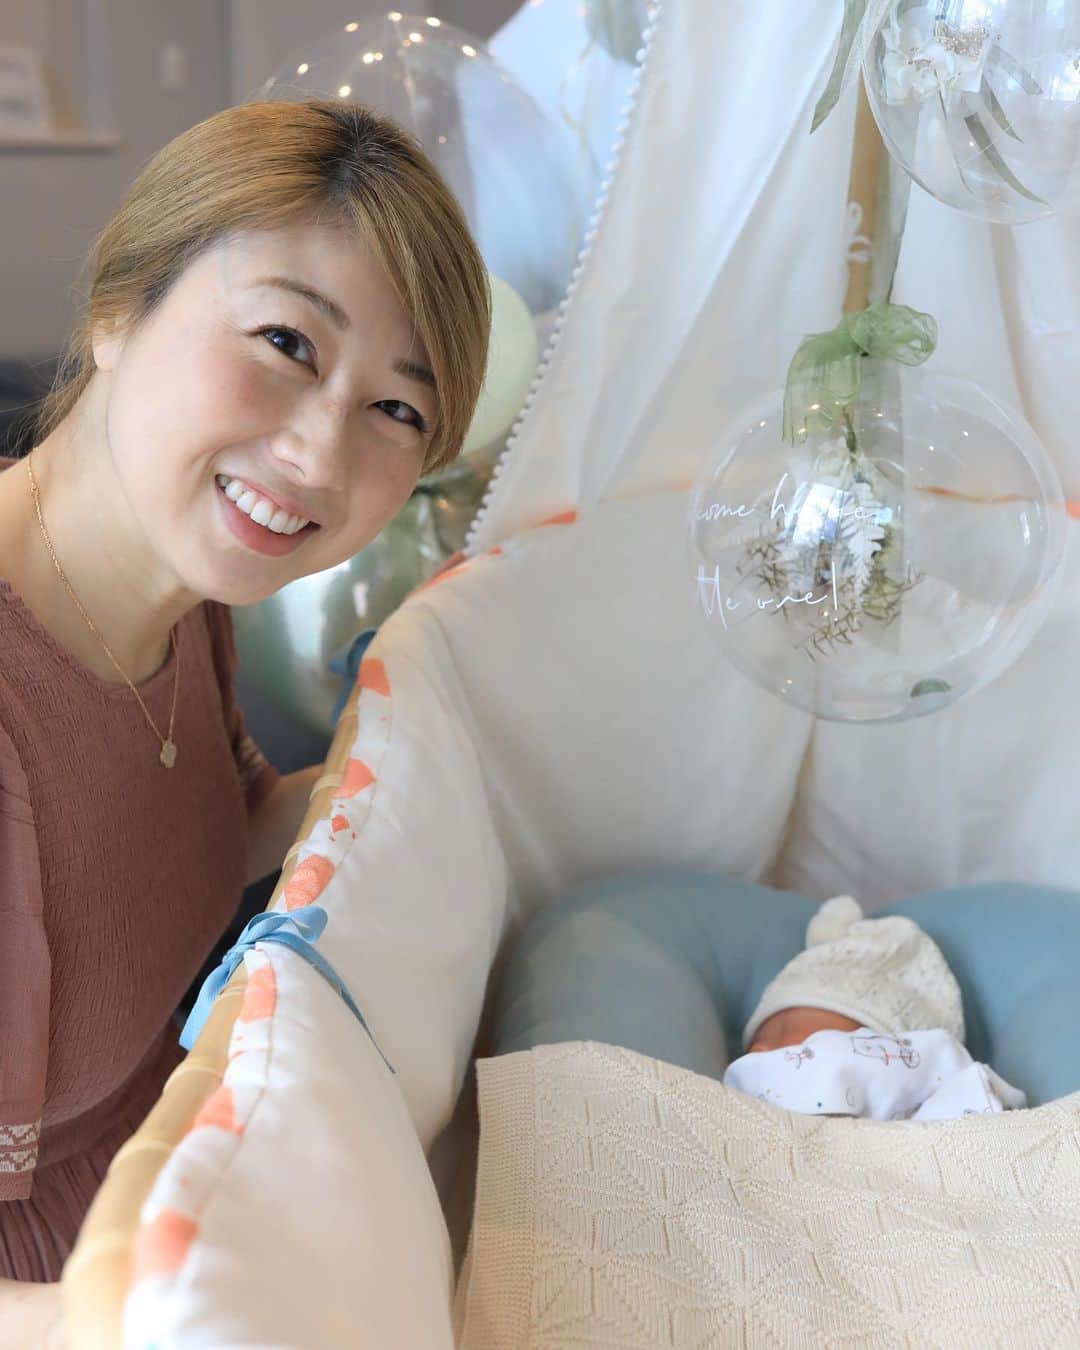 吉田ちかさんのインスタグラム写真 - (吉田ちかInstagram)「Had a peaceful “welcome home” photo shoot with our baby!   Got him the cutest crib (fell in love with it the moment I saw it) and the loveliest balloons💕   Being in the hospital for so long I didn’t have time to do any decorating, so I custom ordered balloons from @balloonmomora - a balloon artist (and Chikatomo!) I met in Kuala Lumpur🎈Her work is amazing! I   It’s definitely fun hanging out with Pudding and the baby and watching them interact, but some quiet time with him is also nice while the big sister is at school lol He’s been sleeping like an angel most of the day!  I know you guys are waiting for us to announce his nickname😆 I have a few candidates, but still debating between a few especially since I want one that sounds good in both Japanese and English. Some of you guys have made suggestions in previous posts, but if you have any more let us know!  ベビーと平和なウェルカムホーム撮影📸   一目惚れしたベビーベッドにカスタムオーダーのバルーンを飾ってみました🎈   今回は入院が長くて自分でデコレーションする時間がなく、以前クアラルンプールで出会ったバルーンアーティスト (&ちか友！）のMomoさん @balloonmomora にお願いしました⭐️めちゃくちゃ素敵な作品で感激💕   プリン姉ちゃんと一緒にみんなで過ごすのももちろん楽しいですが、プリンが学校に言ってる間のベビーとの静かな時間も貴重！今のところ、1日のほとんどは天使のように寝てくれています！  そんなベビーのニックネームは何になるのか？！いくつか候補はあるのですが、まだ決めきれていなくて😅… 英語と日本語の発音両方で語呂がいいものって、結構難しい！  コメントで当てようとしてくださっている方もいましたが、他にもいいアイディアがあったら教えてください⭐️」10月19日 16時30分 - bilingirl_chika